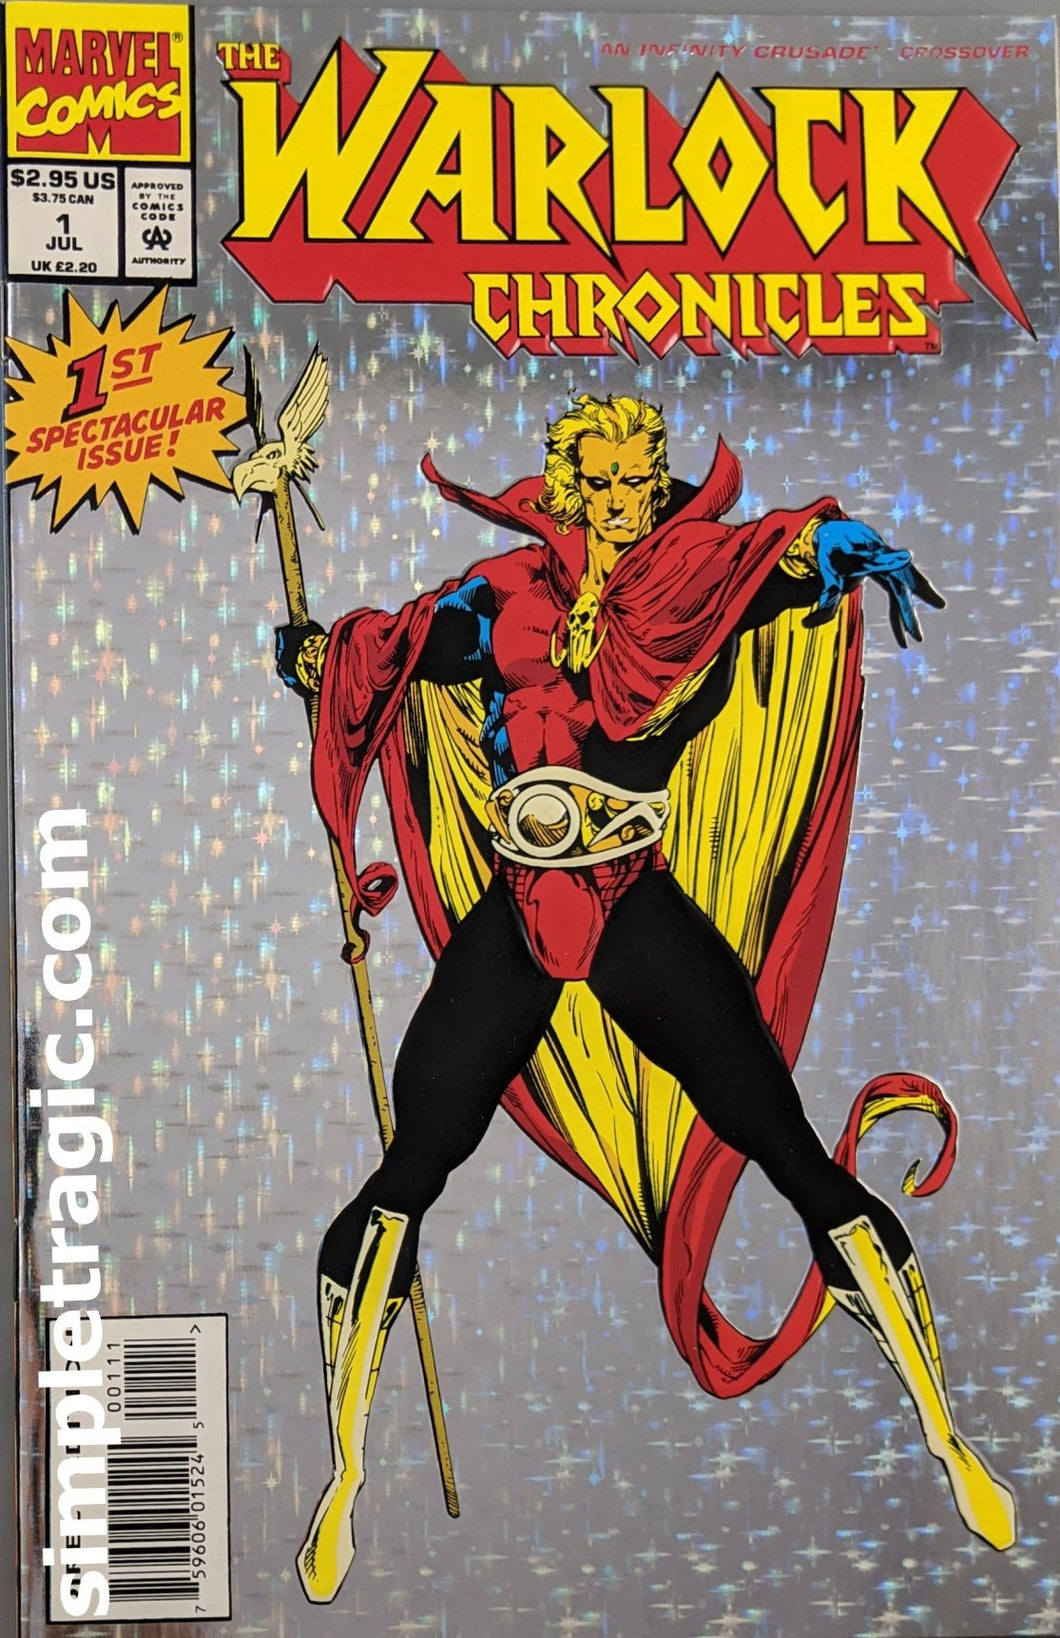 Warlock Chronicles #1 Comic Cover by Tom Raney